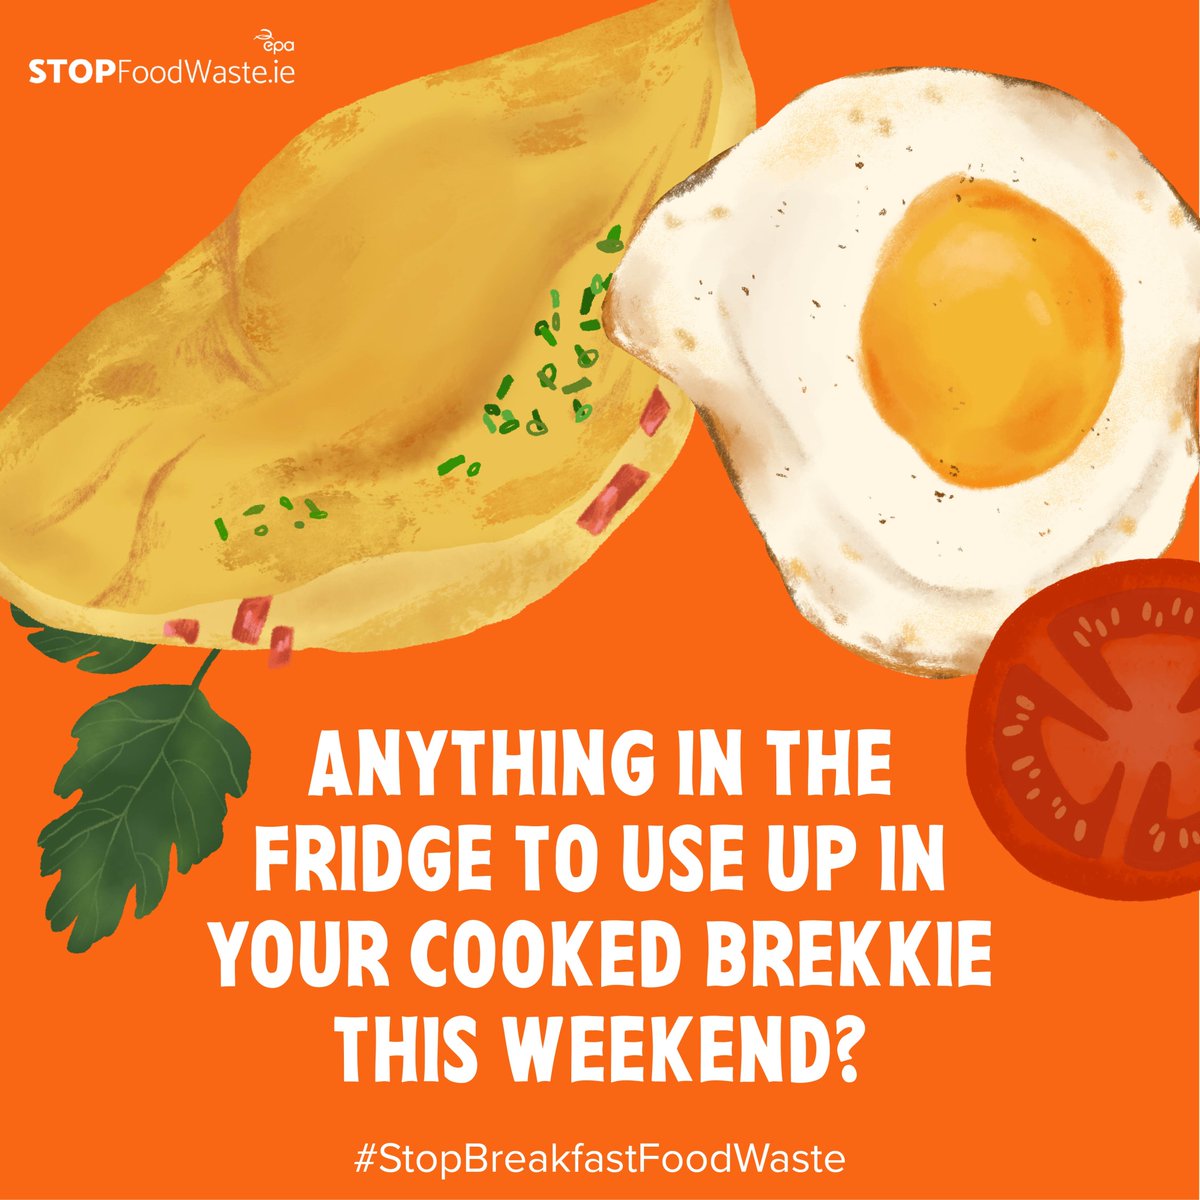 Whether you’re cooking a fry-up🥓, an omelette🍳or even pancakes🥞 – take a look in the fridge to for fruit or veg to use up & serve up something extra delicious! •Add onion, mushrooms or peppers to eggs! •Add cherry tomatoes to the pan or grill! •Top pancakes with berries!